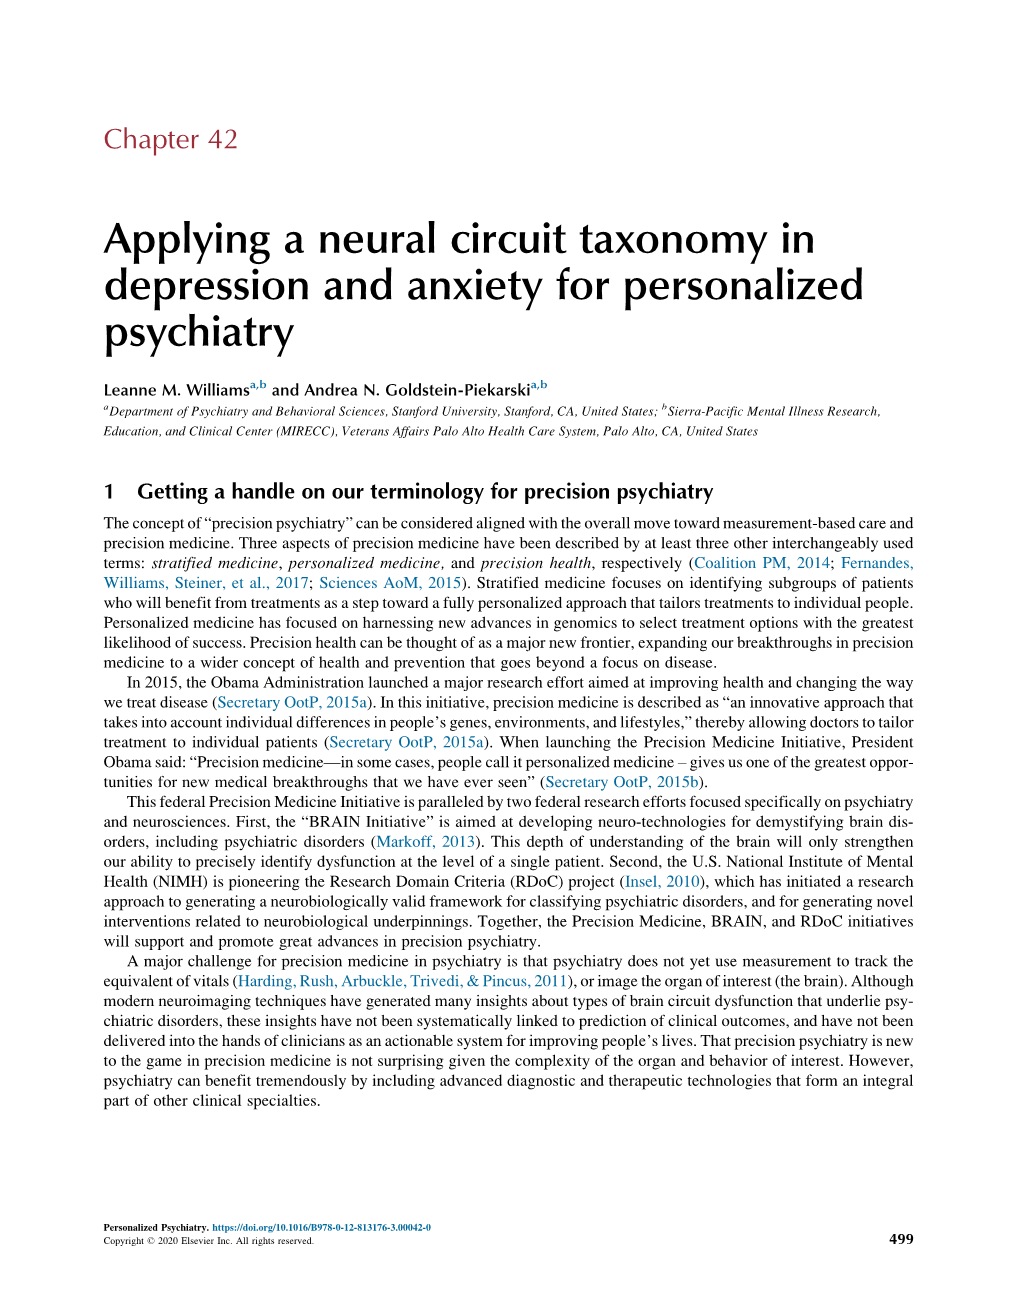 Applying a Neural Circuit Taxonomy in Depression and Anxiety for Personalized Psychiatry